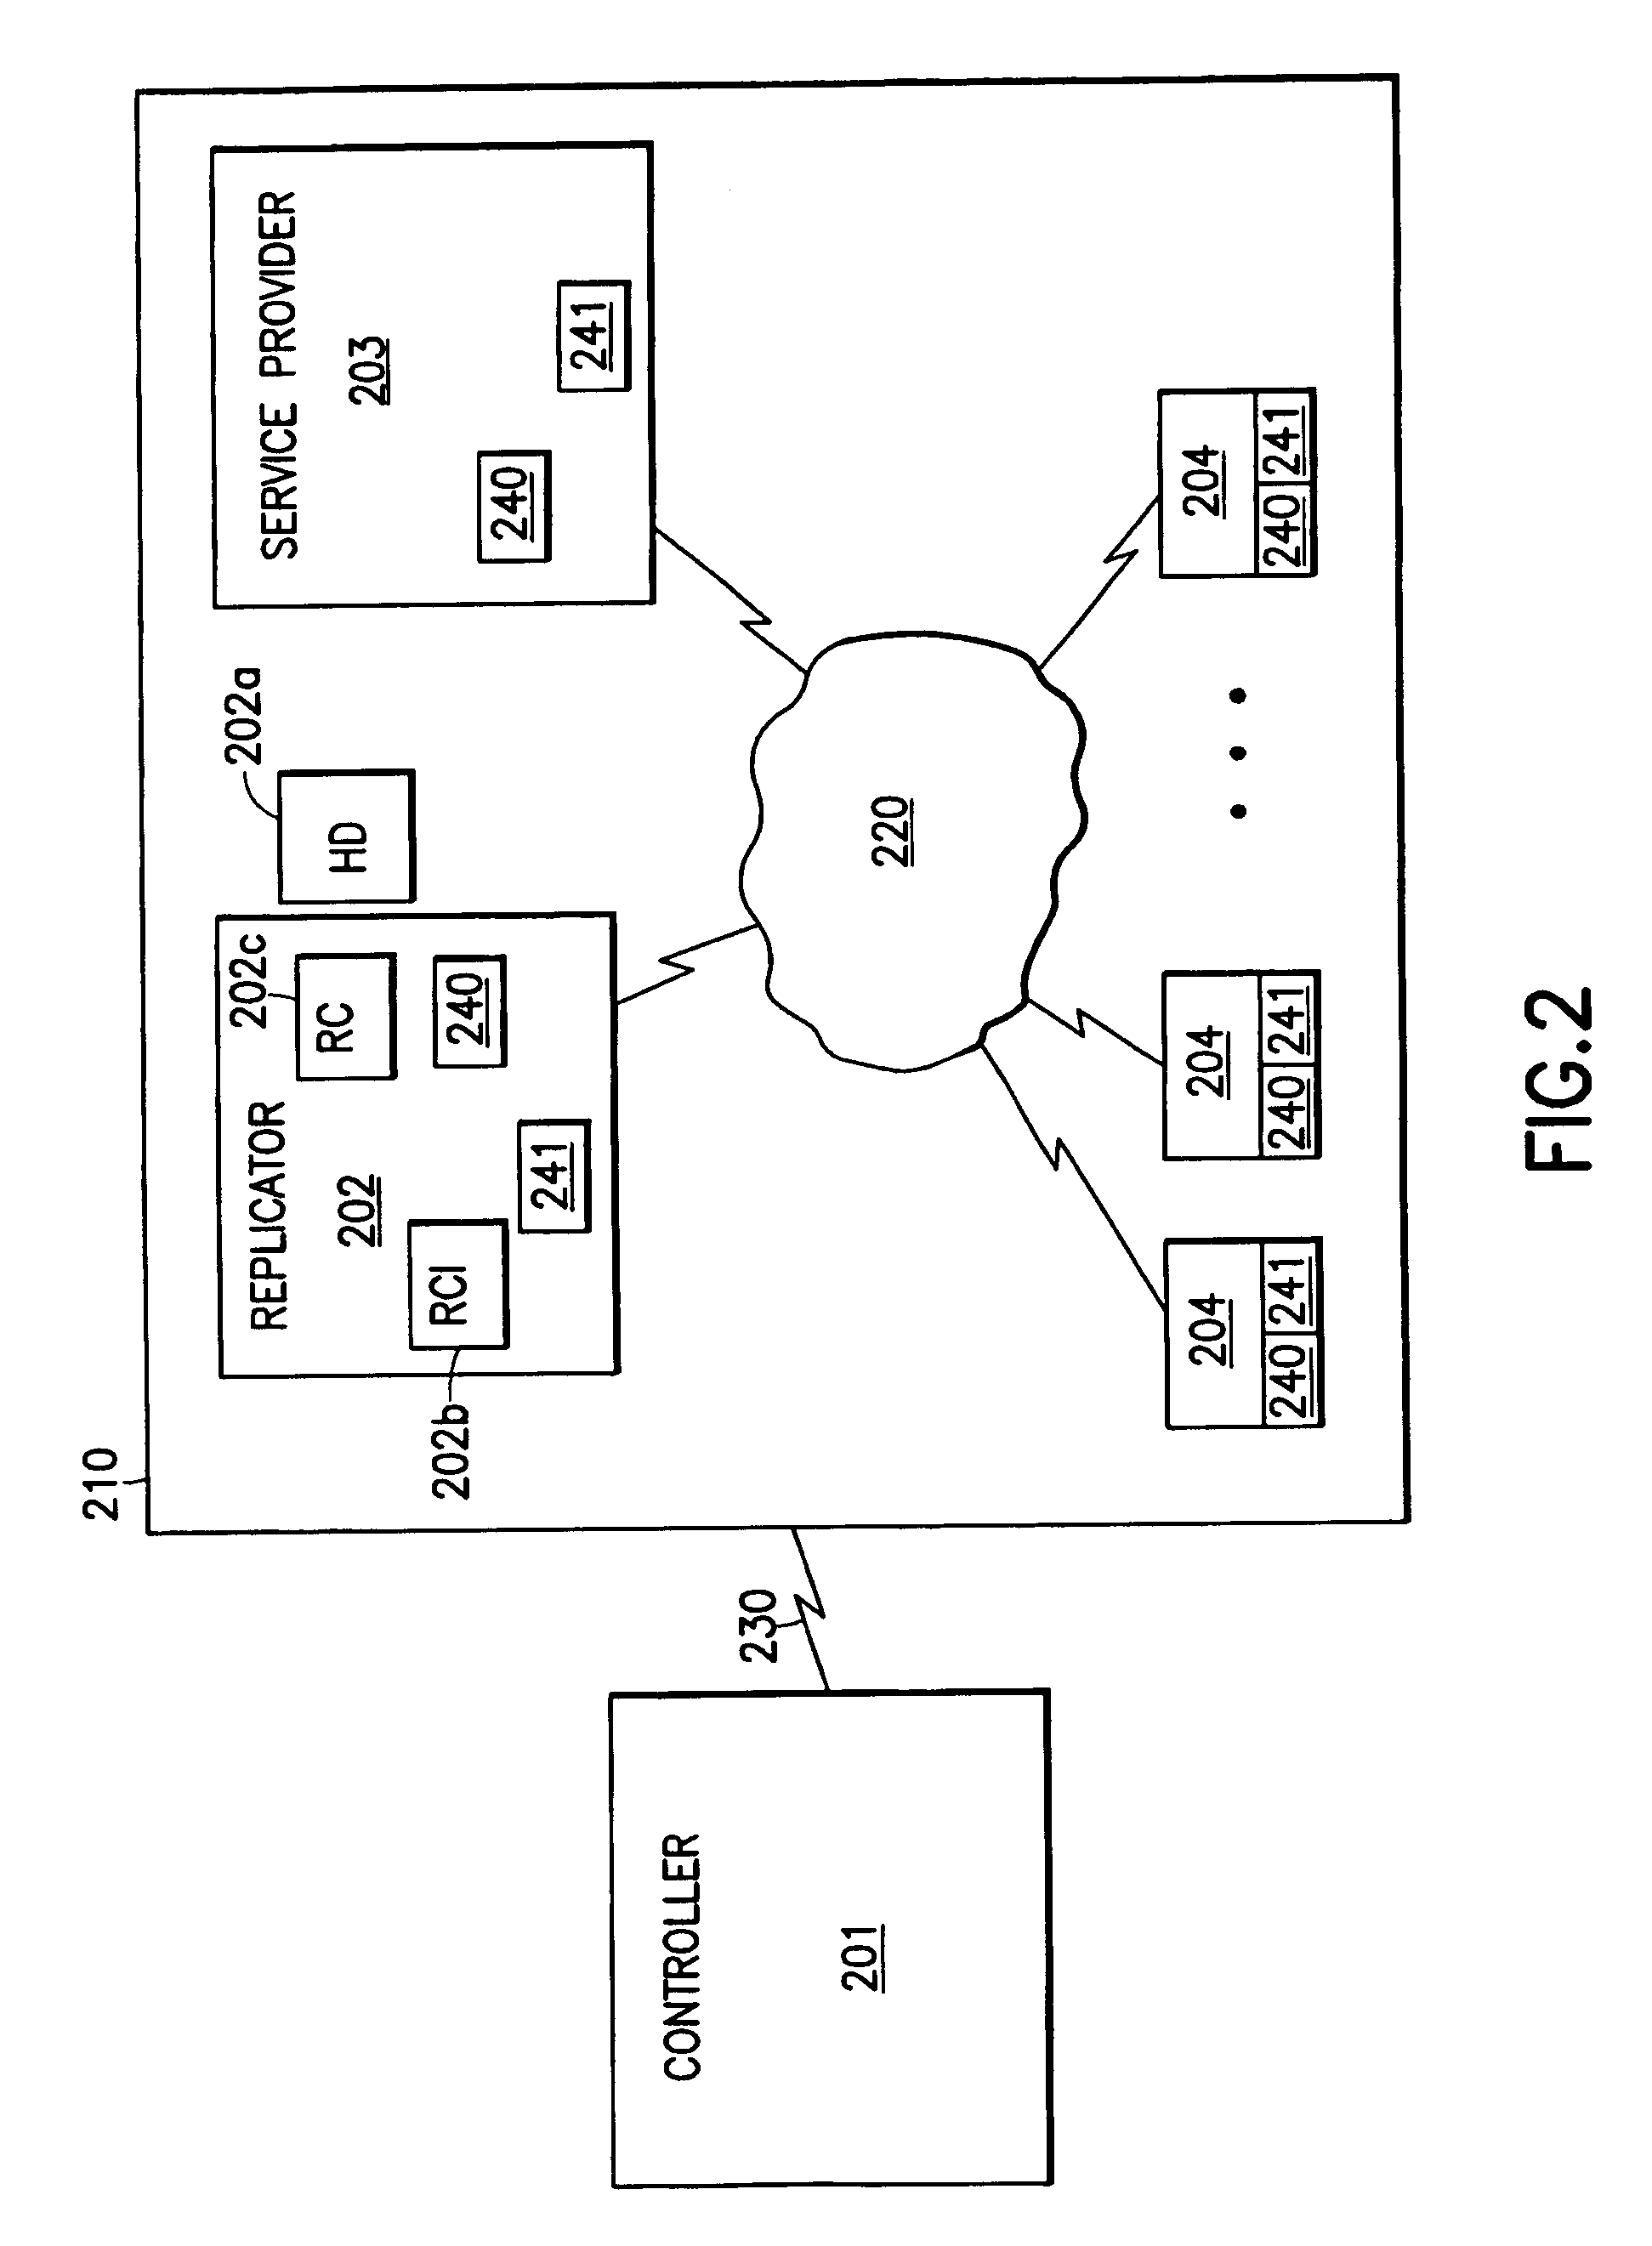 Method and apparatus for replicating and analyzing worm programs